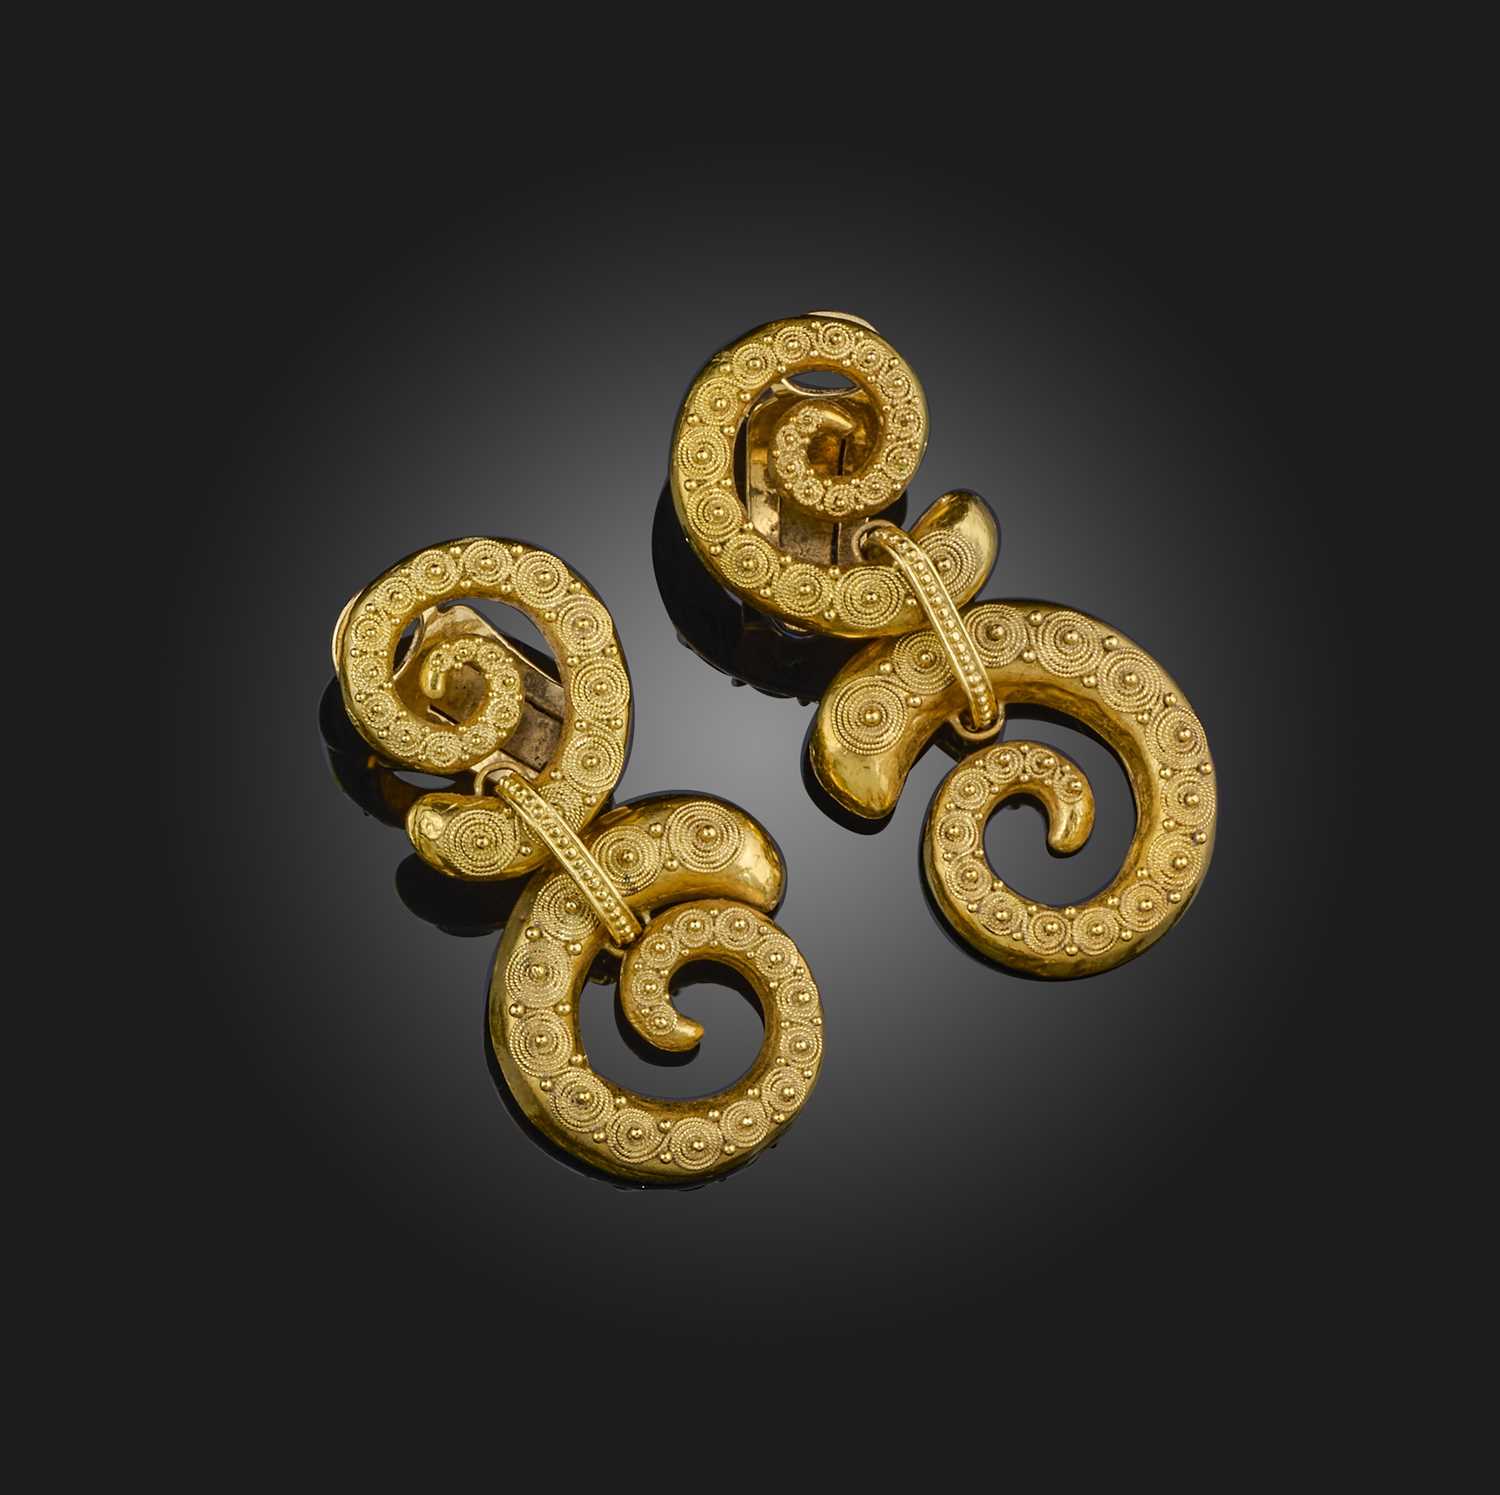 Lalaounis, a pair of gold scroll earrings, with ropetwist and pellet decoration to the two connected